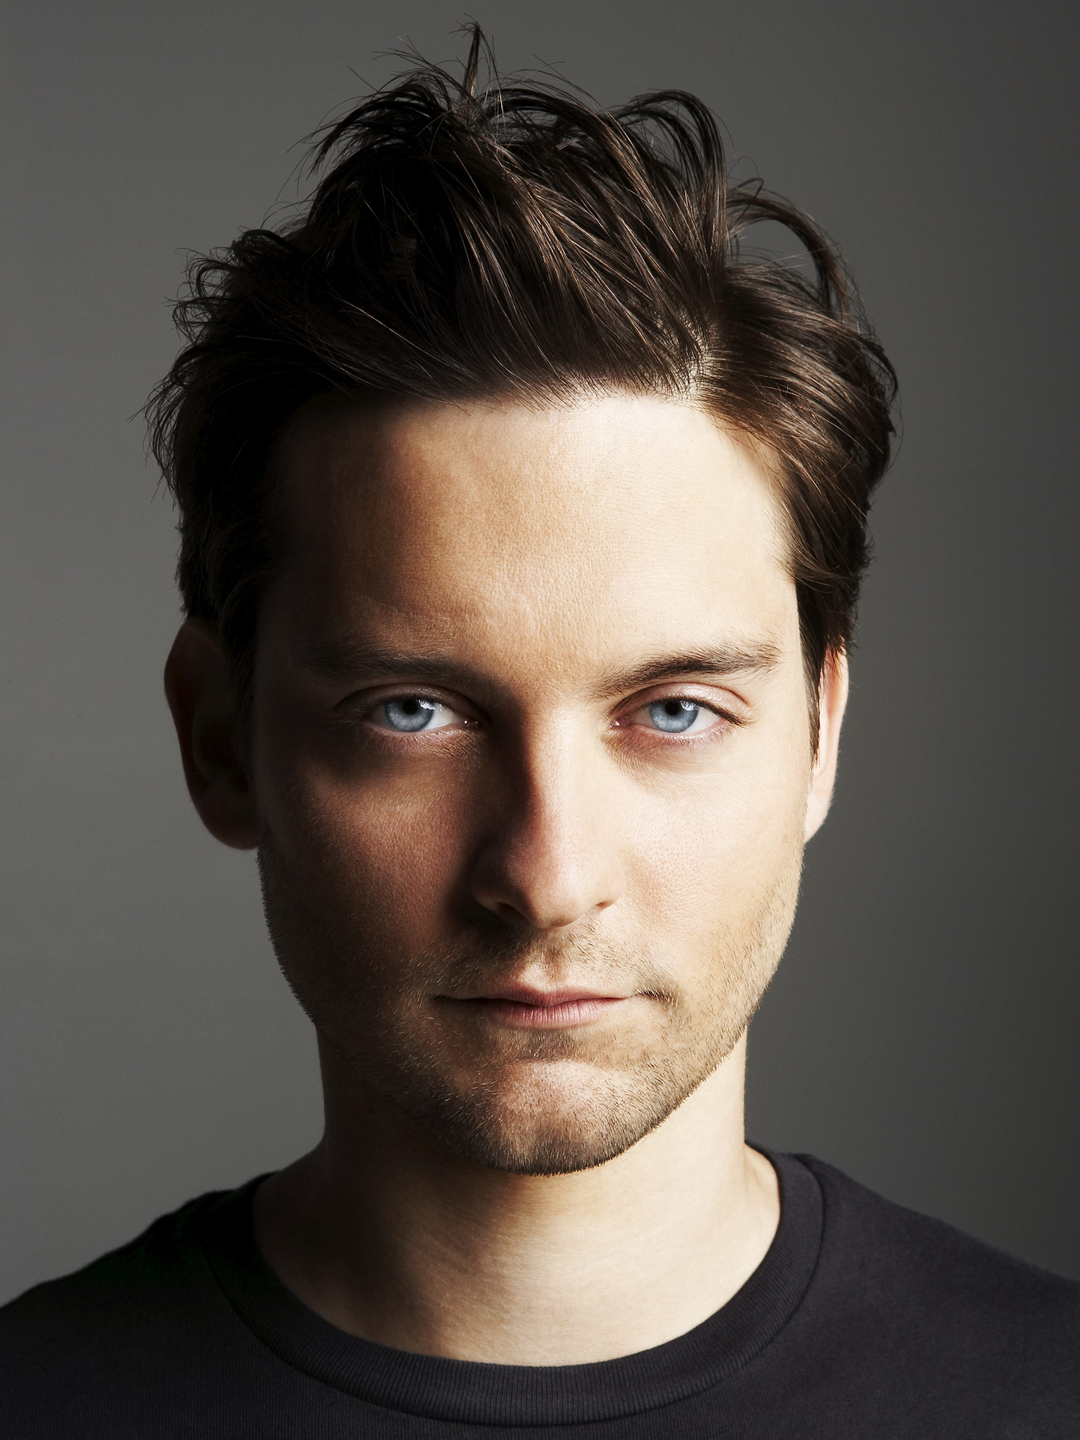 Tobey Maguire early life